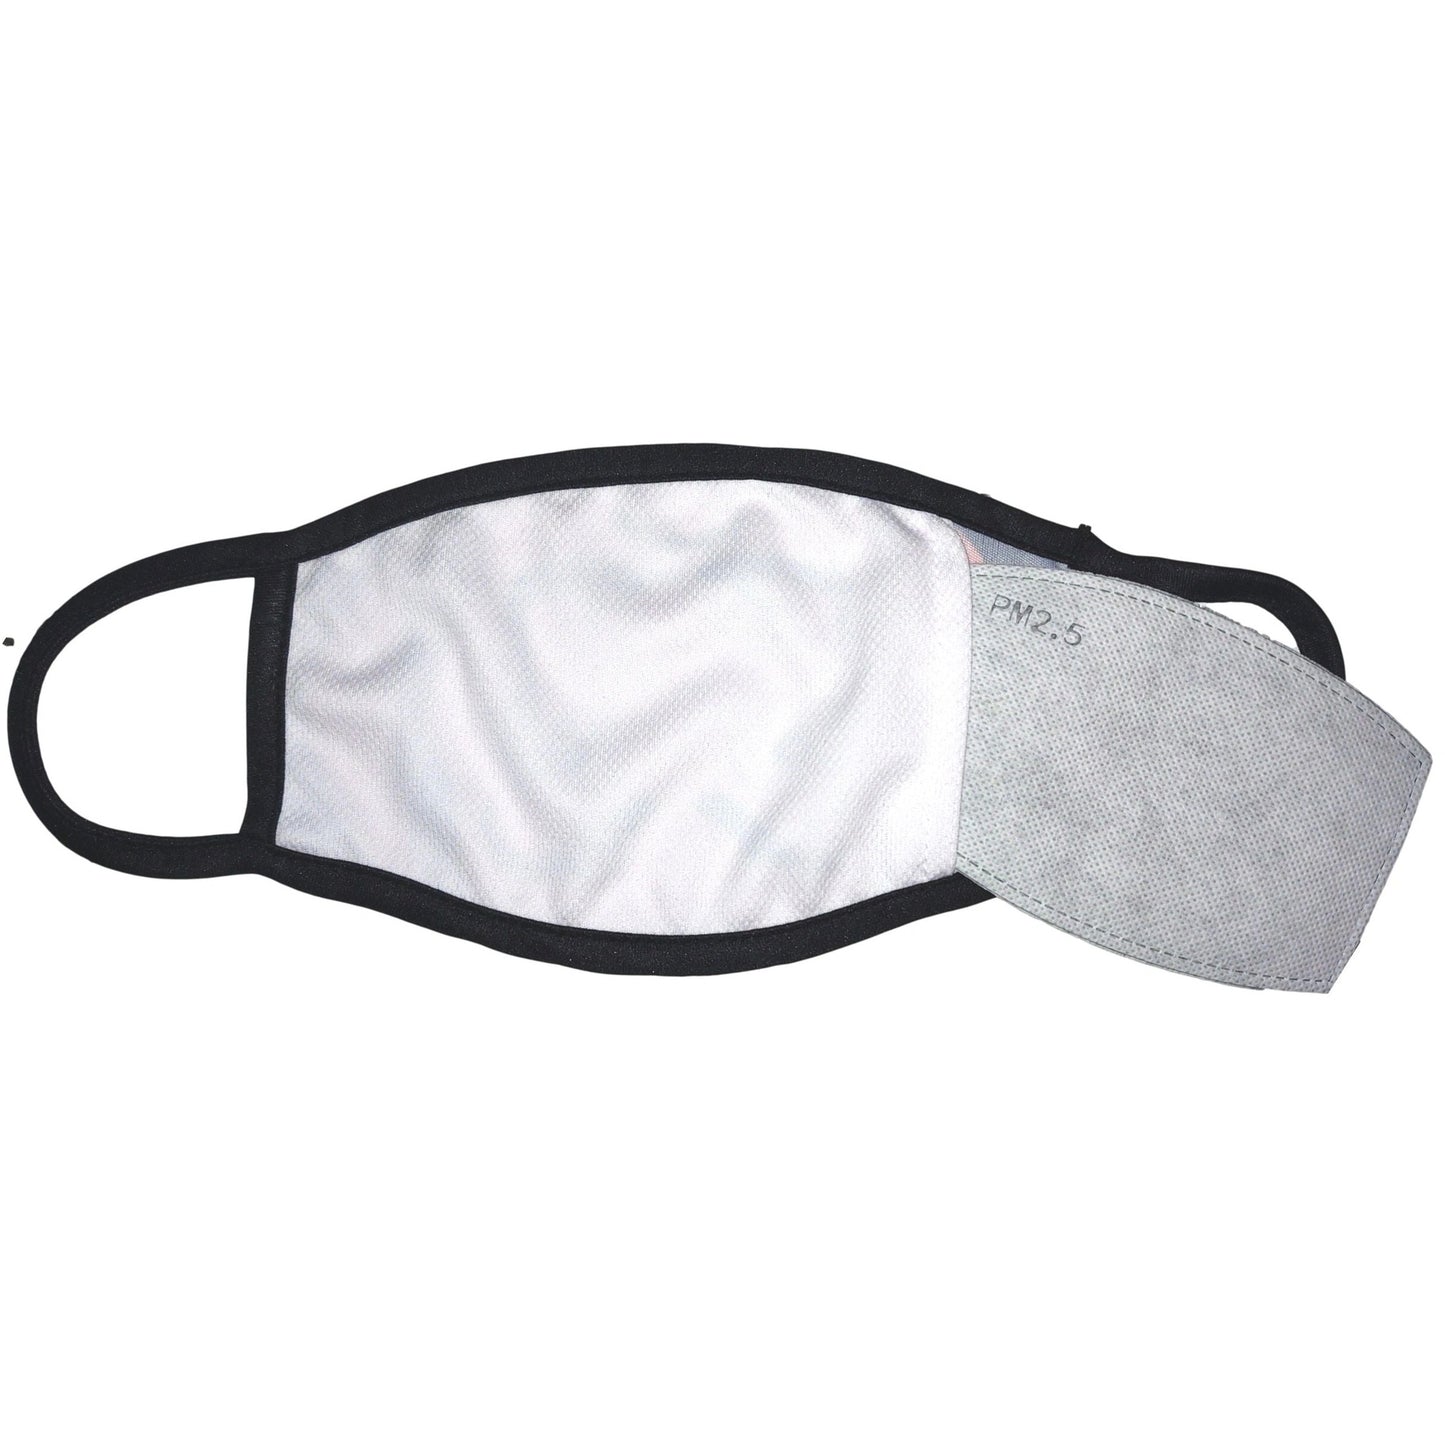 Washable and Reusable Retro Face With Mustache Design Mask